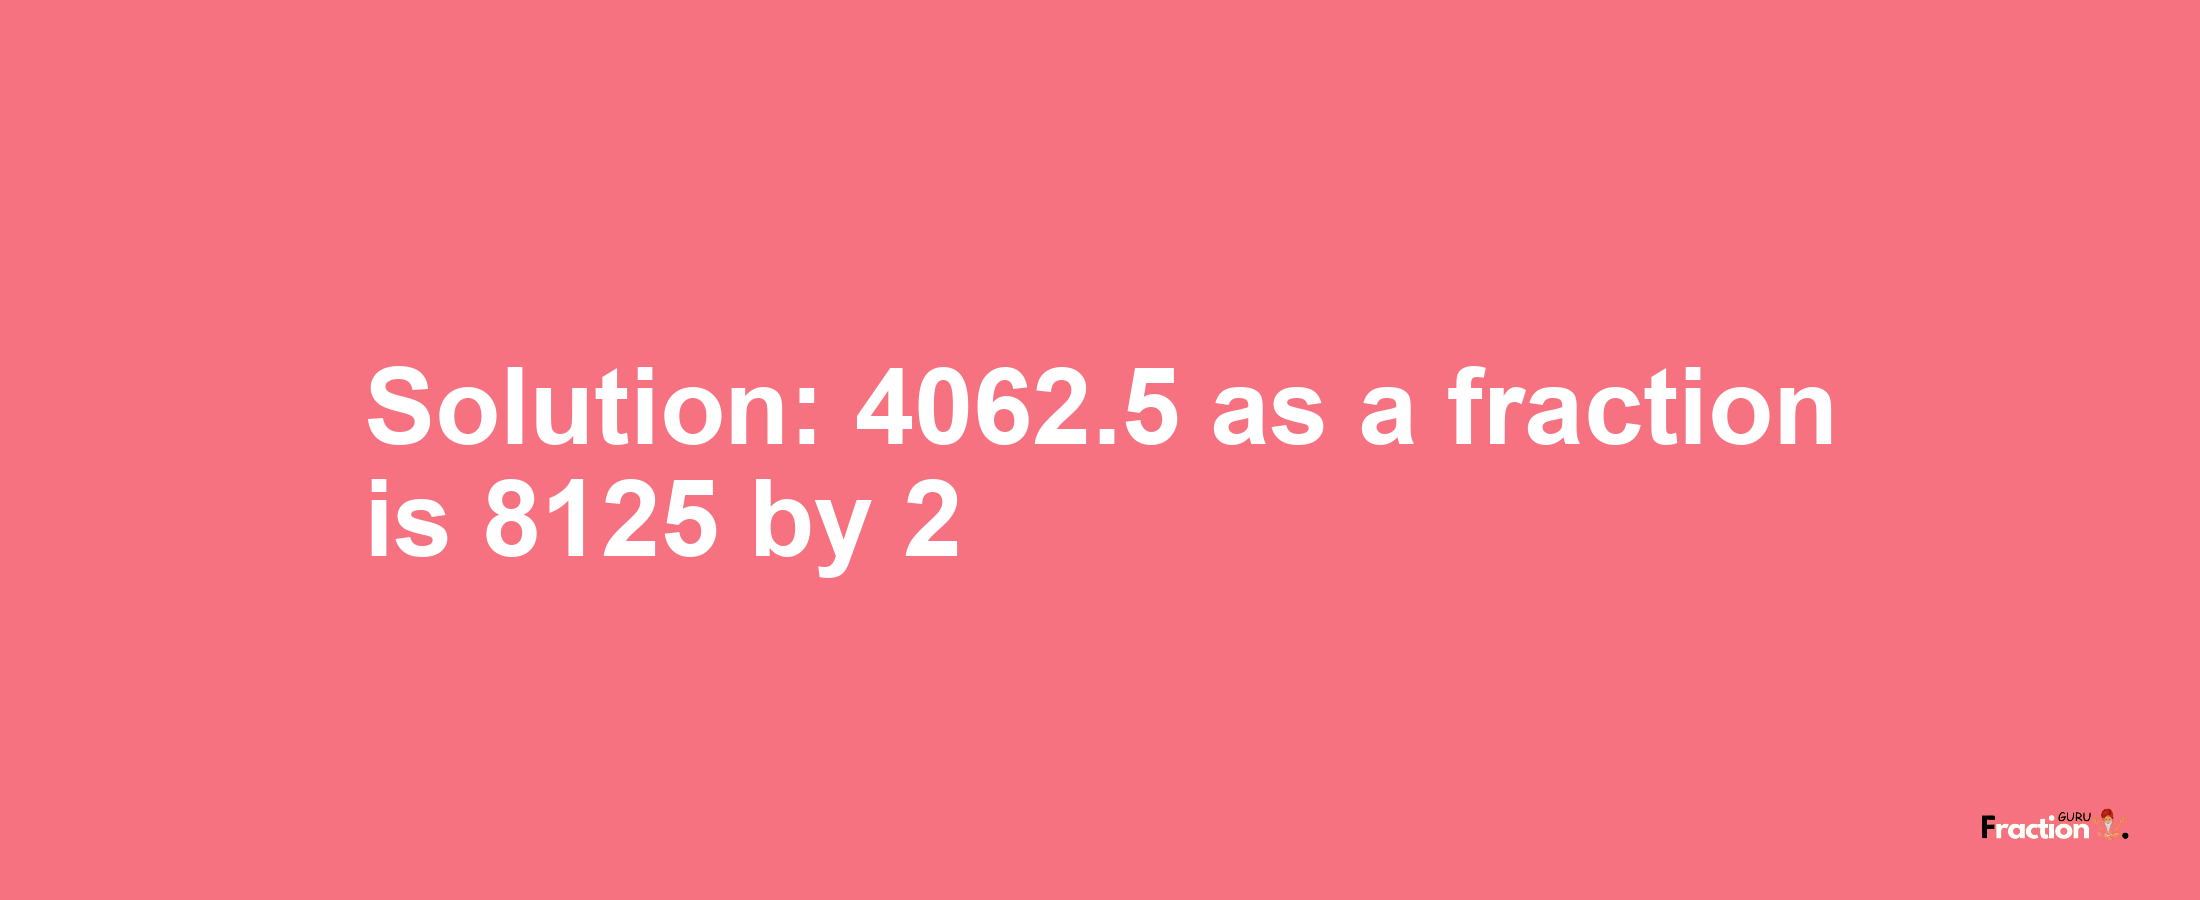 Solution:4062.5 as a fraction is 8125/2